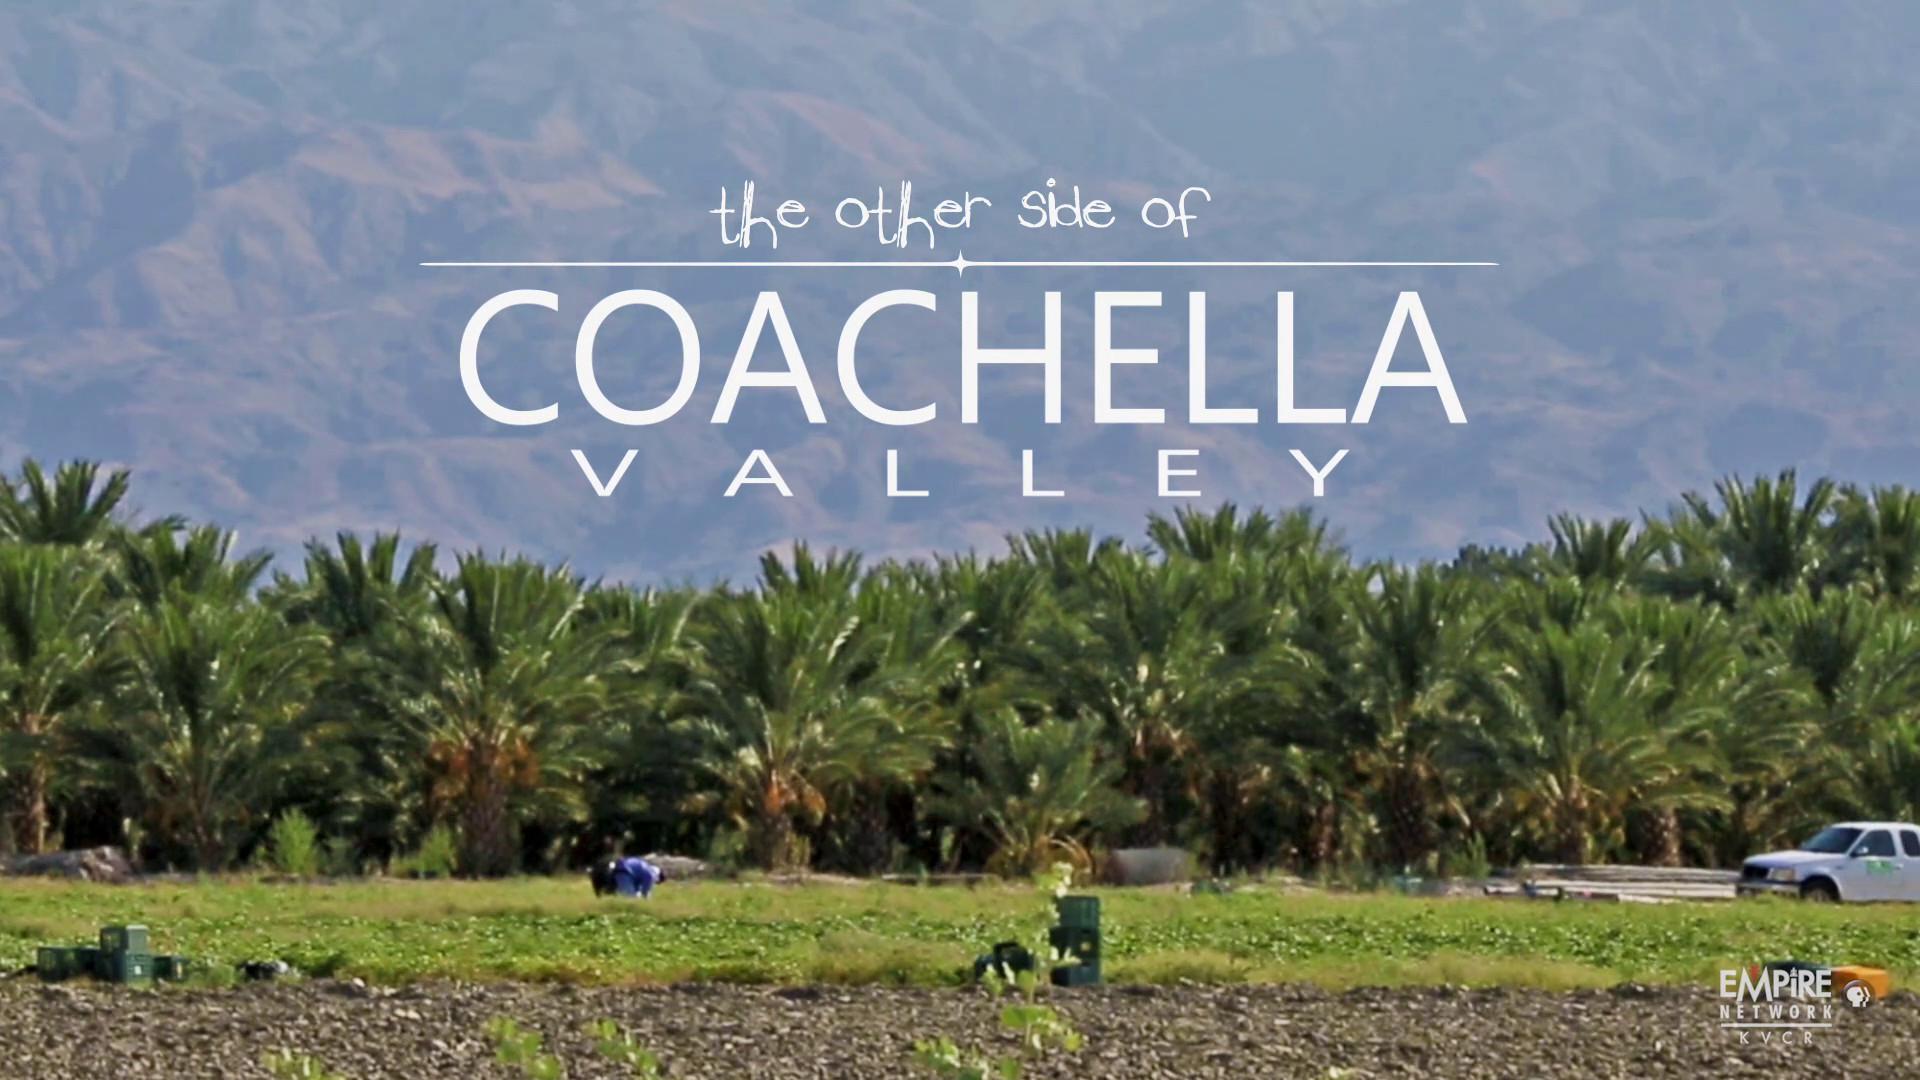 1920x1080 The Other Side of Coachella